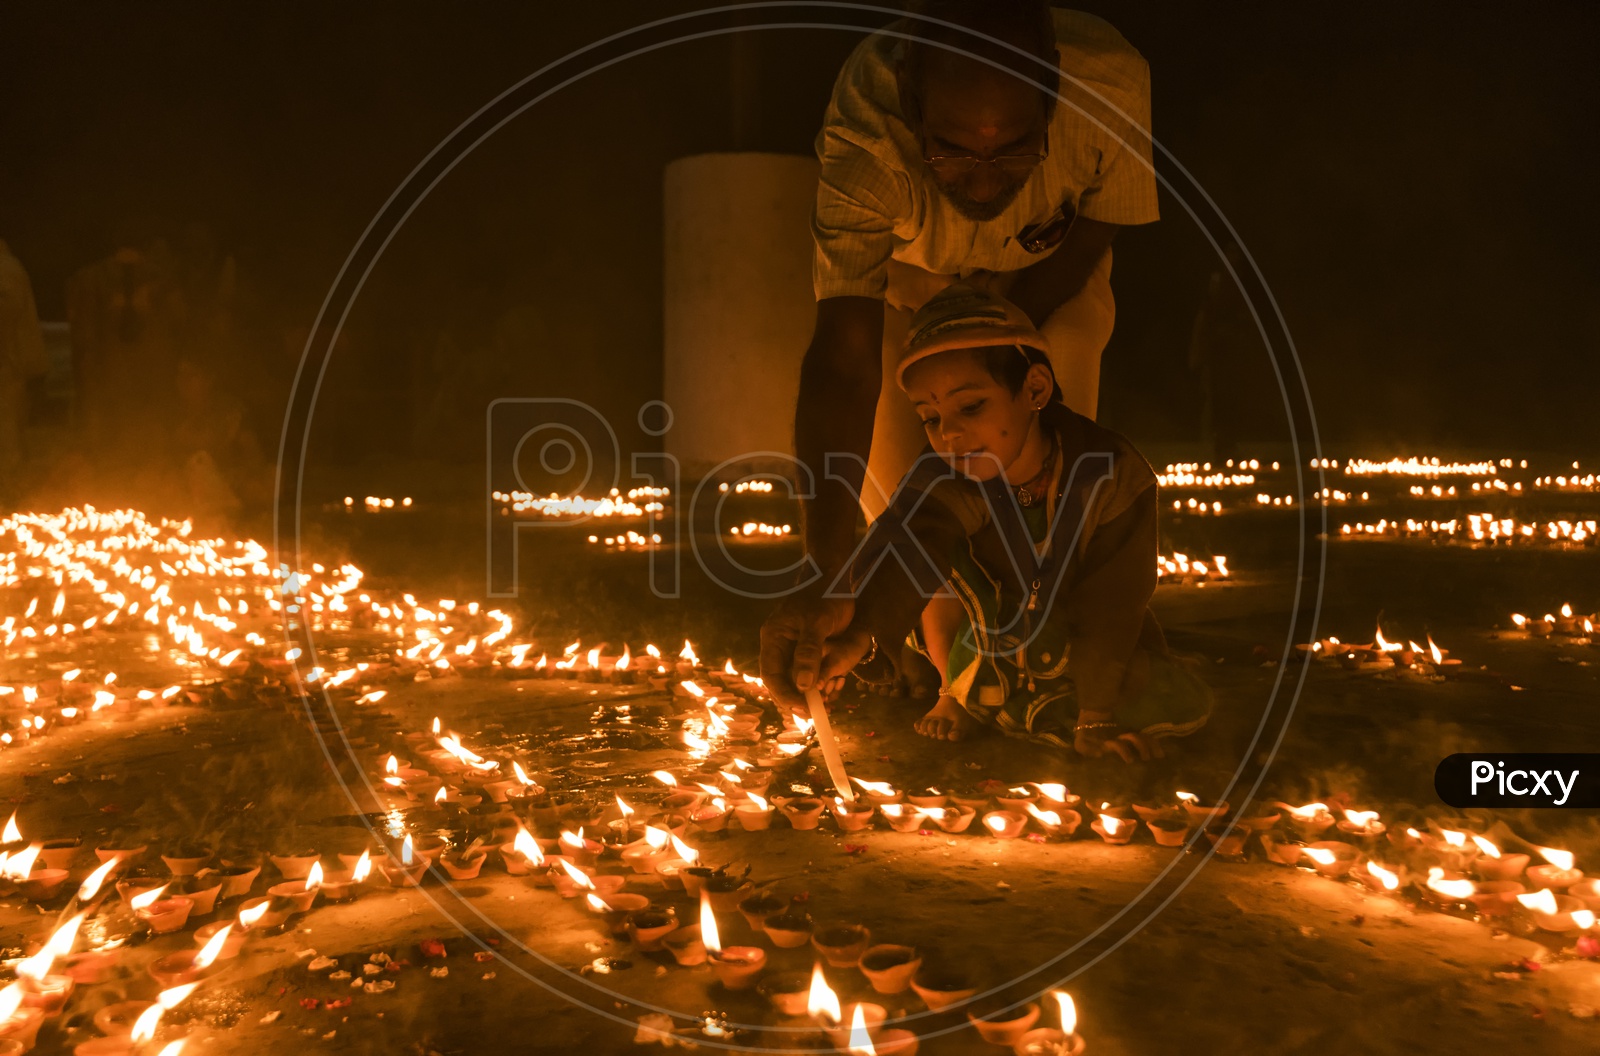 A Small Child  Lighting the Dias in River Bank of ganga River In varanasi